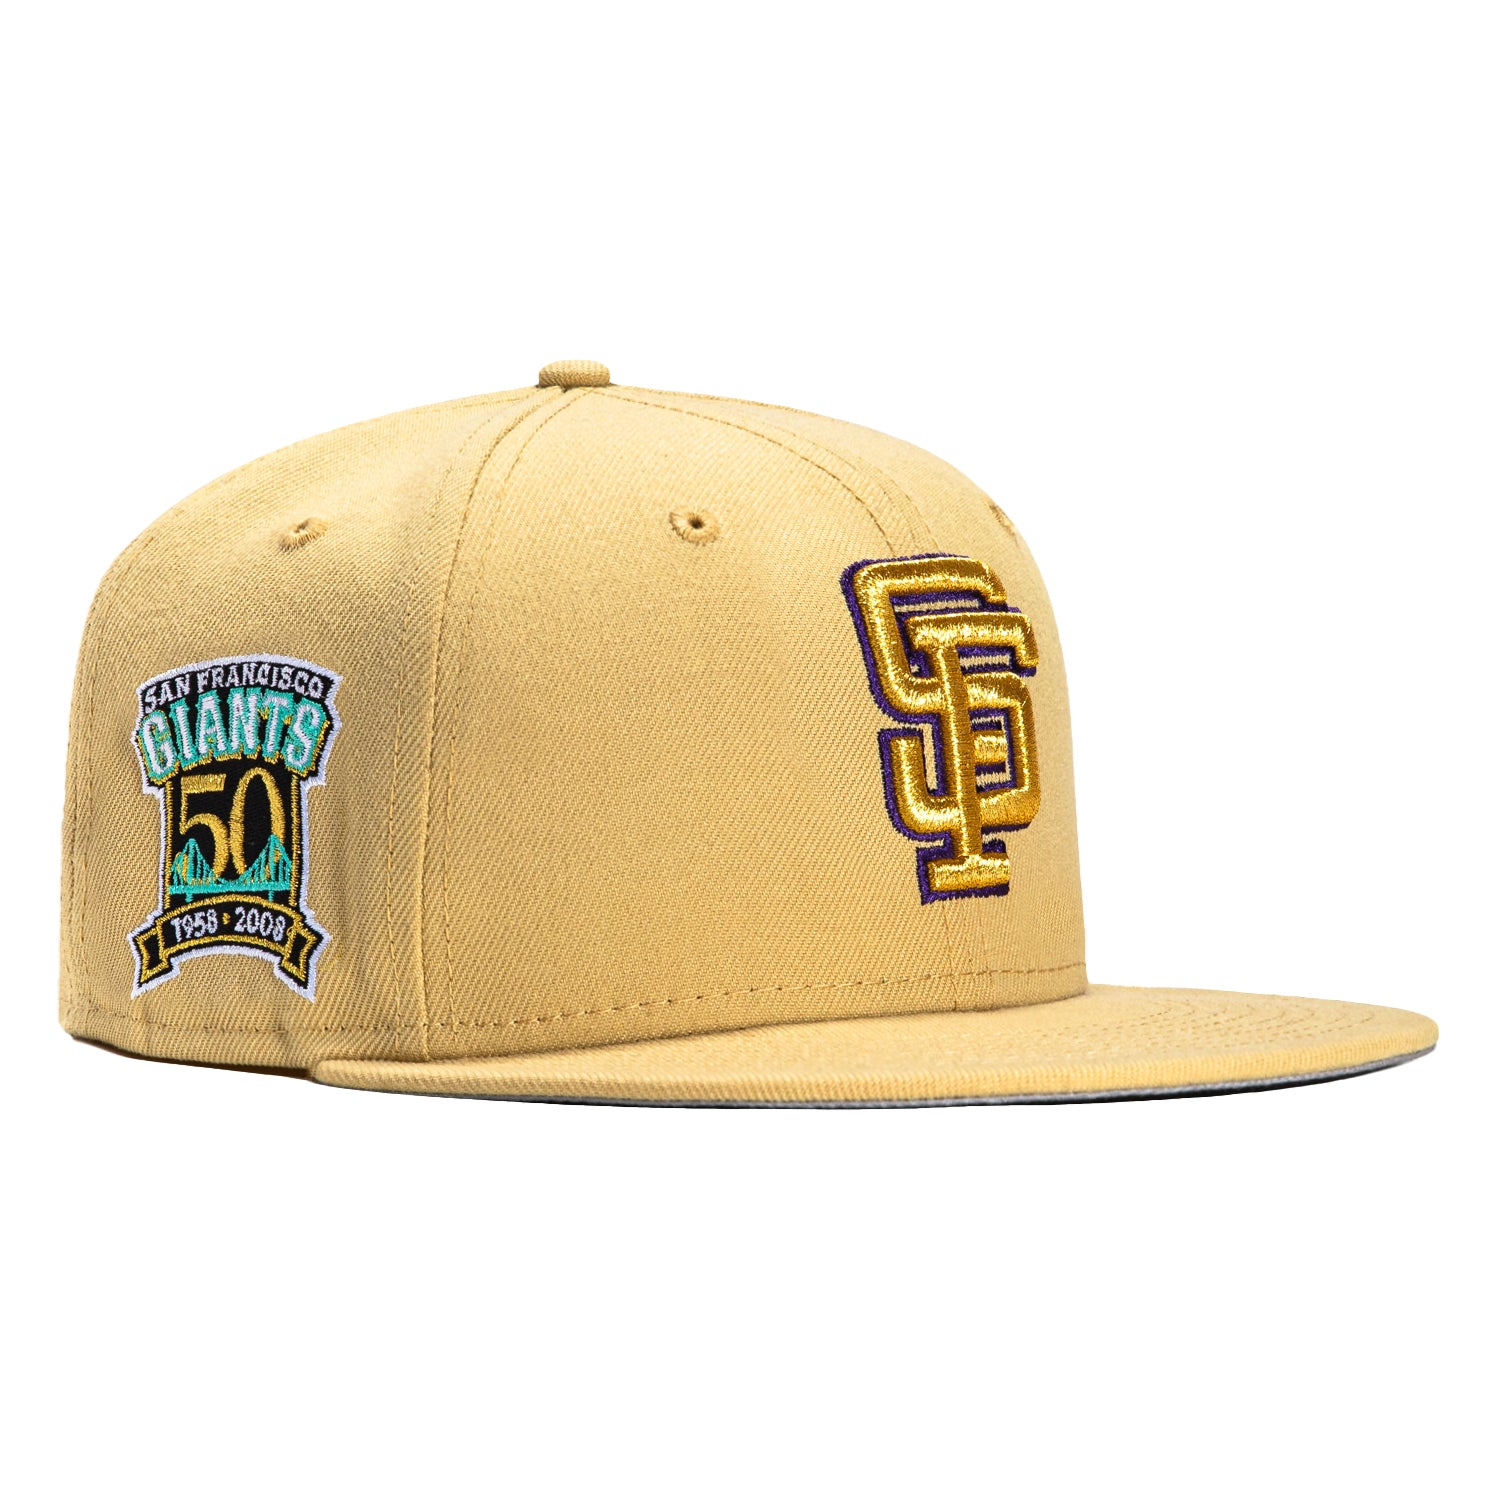 San Francisco Giants New Era 59fifty A's Colors Green And Gold 7 1/4